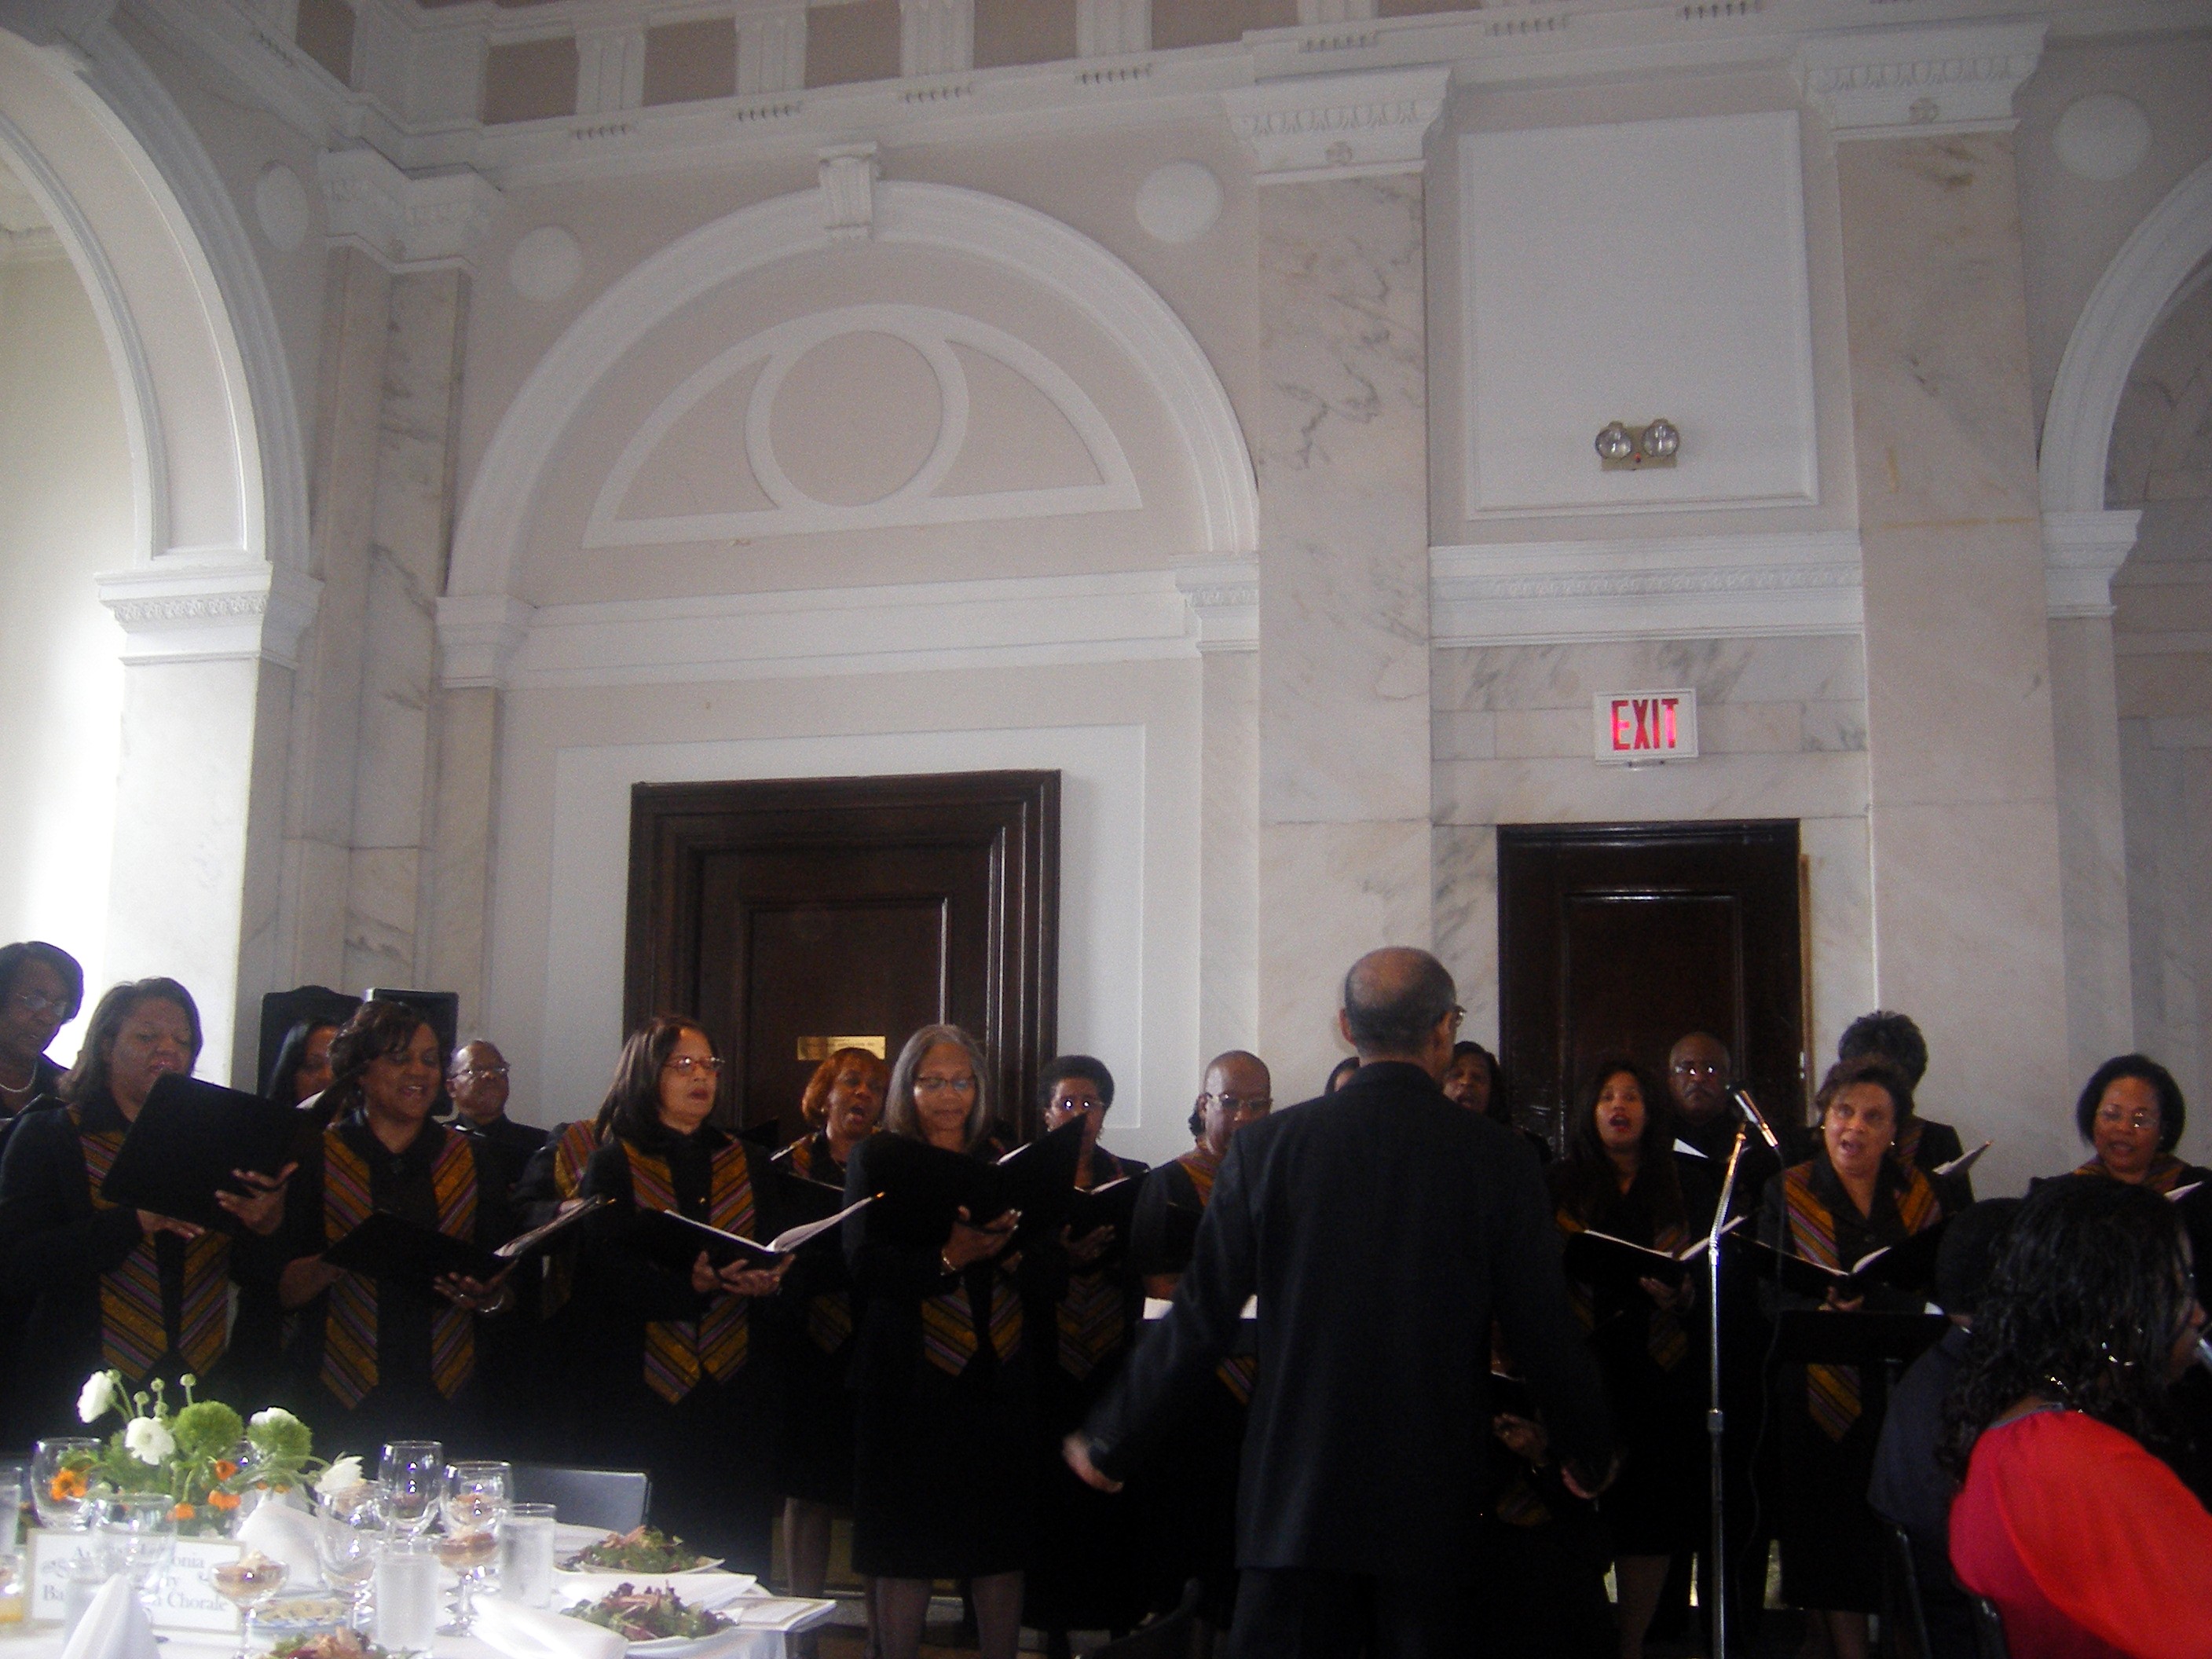 The James C. Ward Classical Arts Chorale Performs at the Celebration